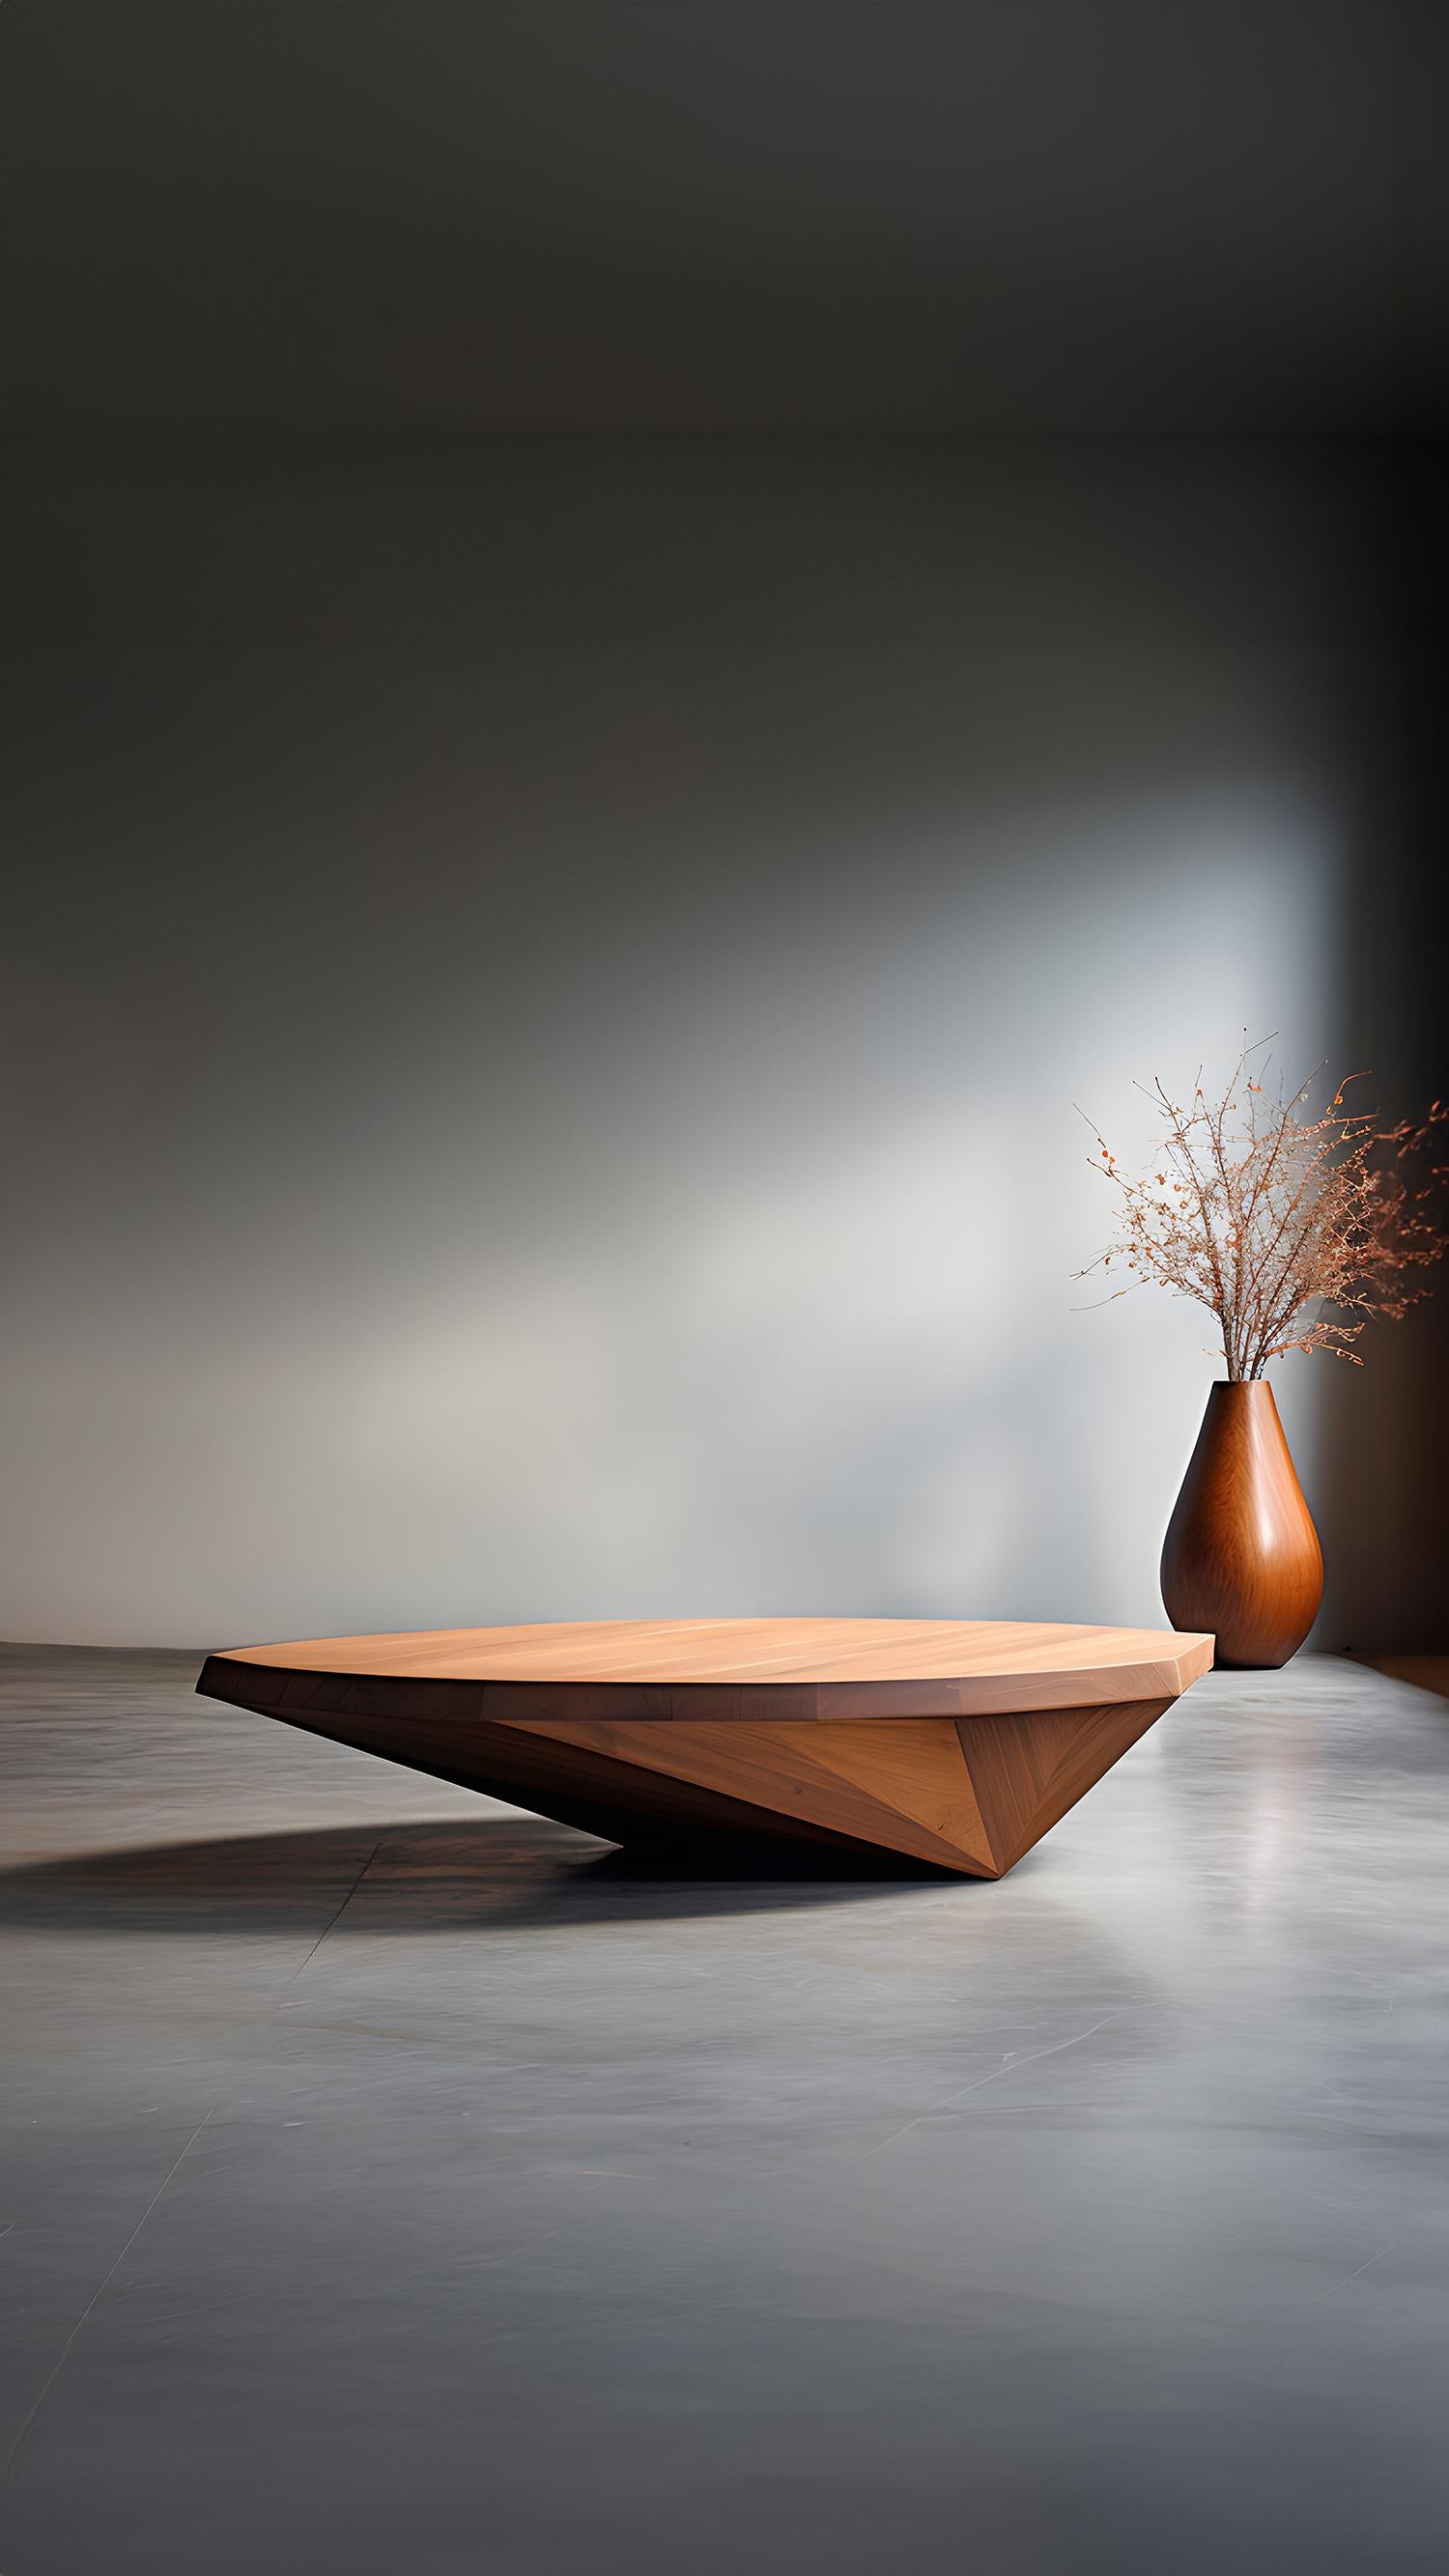 Round Coffee Table Made of Solid Wood, Center Table Solace S17 by Joel Escalona


The Solace table series, designed by Joel Escalona, is a furniture collection that exudes balance and presence, thanks to its sensuous, dense, and irregular shapes.